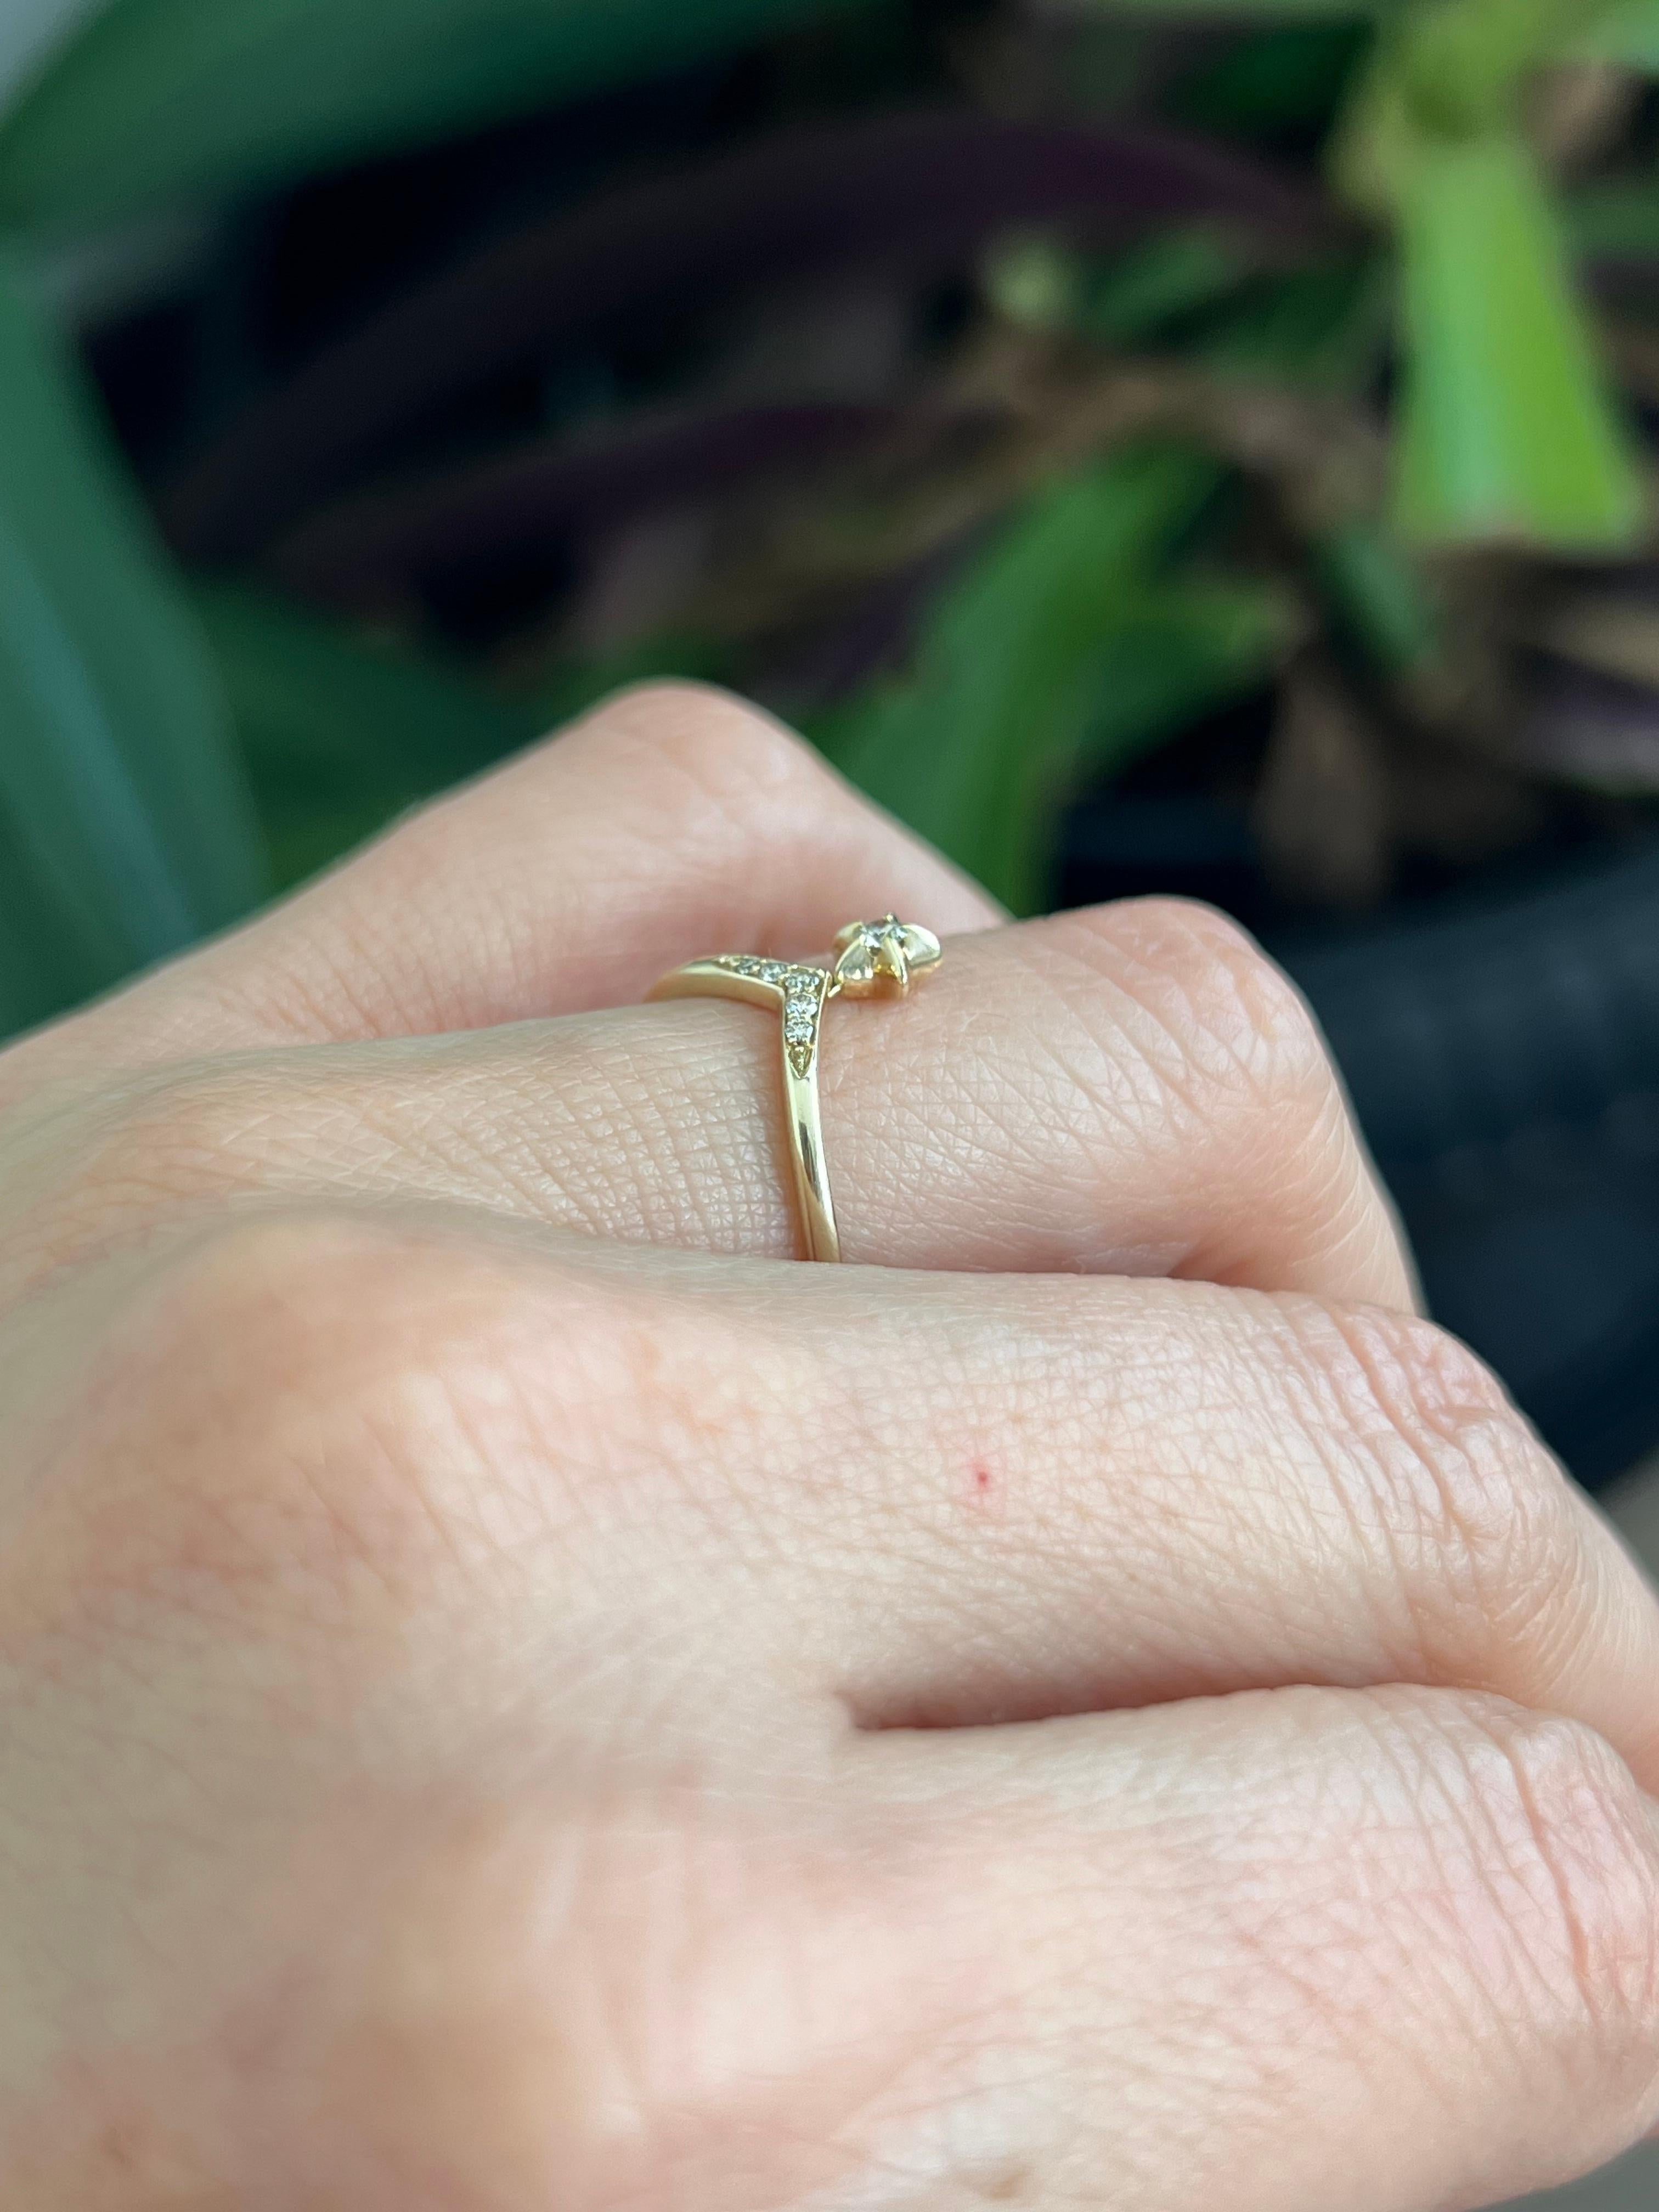 14K yellow gold ring with star dangle charm.

Draw some stylish attention to your fingers with this fun ring! Whether you want to wear it solo or stack it with your engagement ring, this sweet ring will win you compliments and jealous stares -